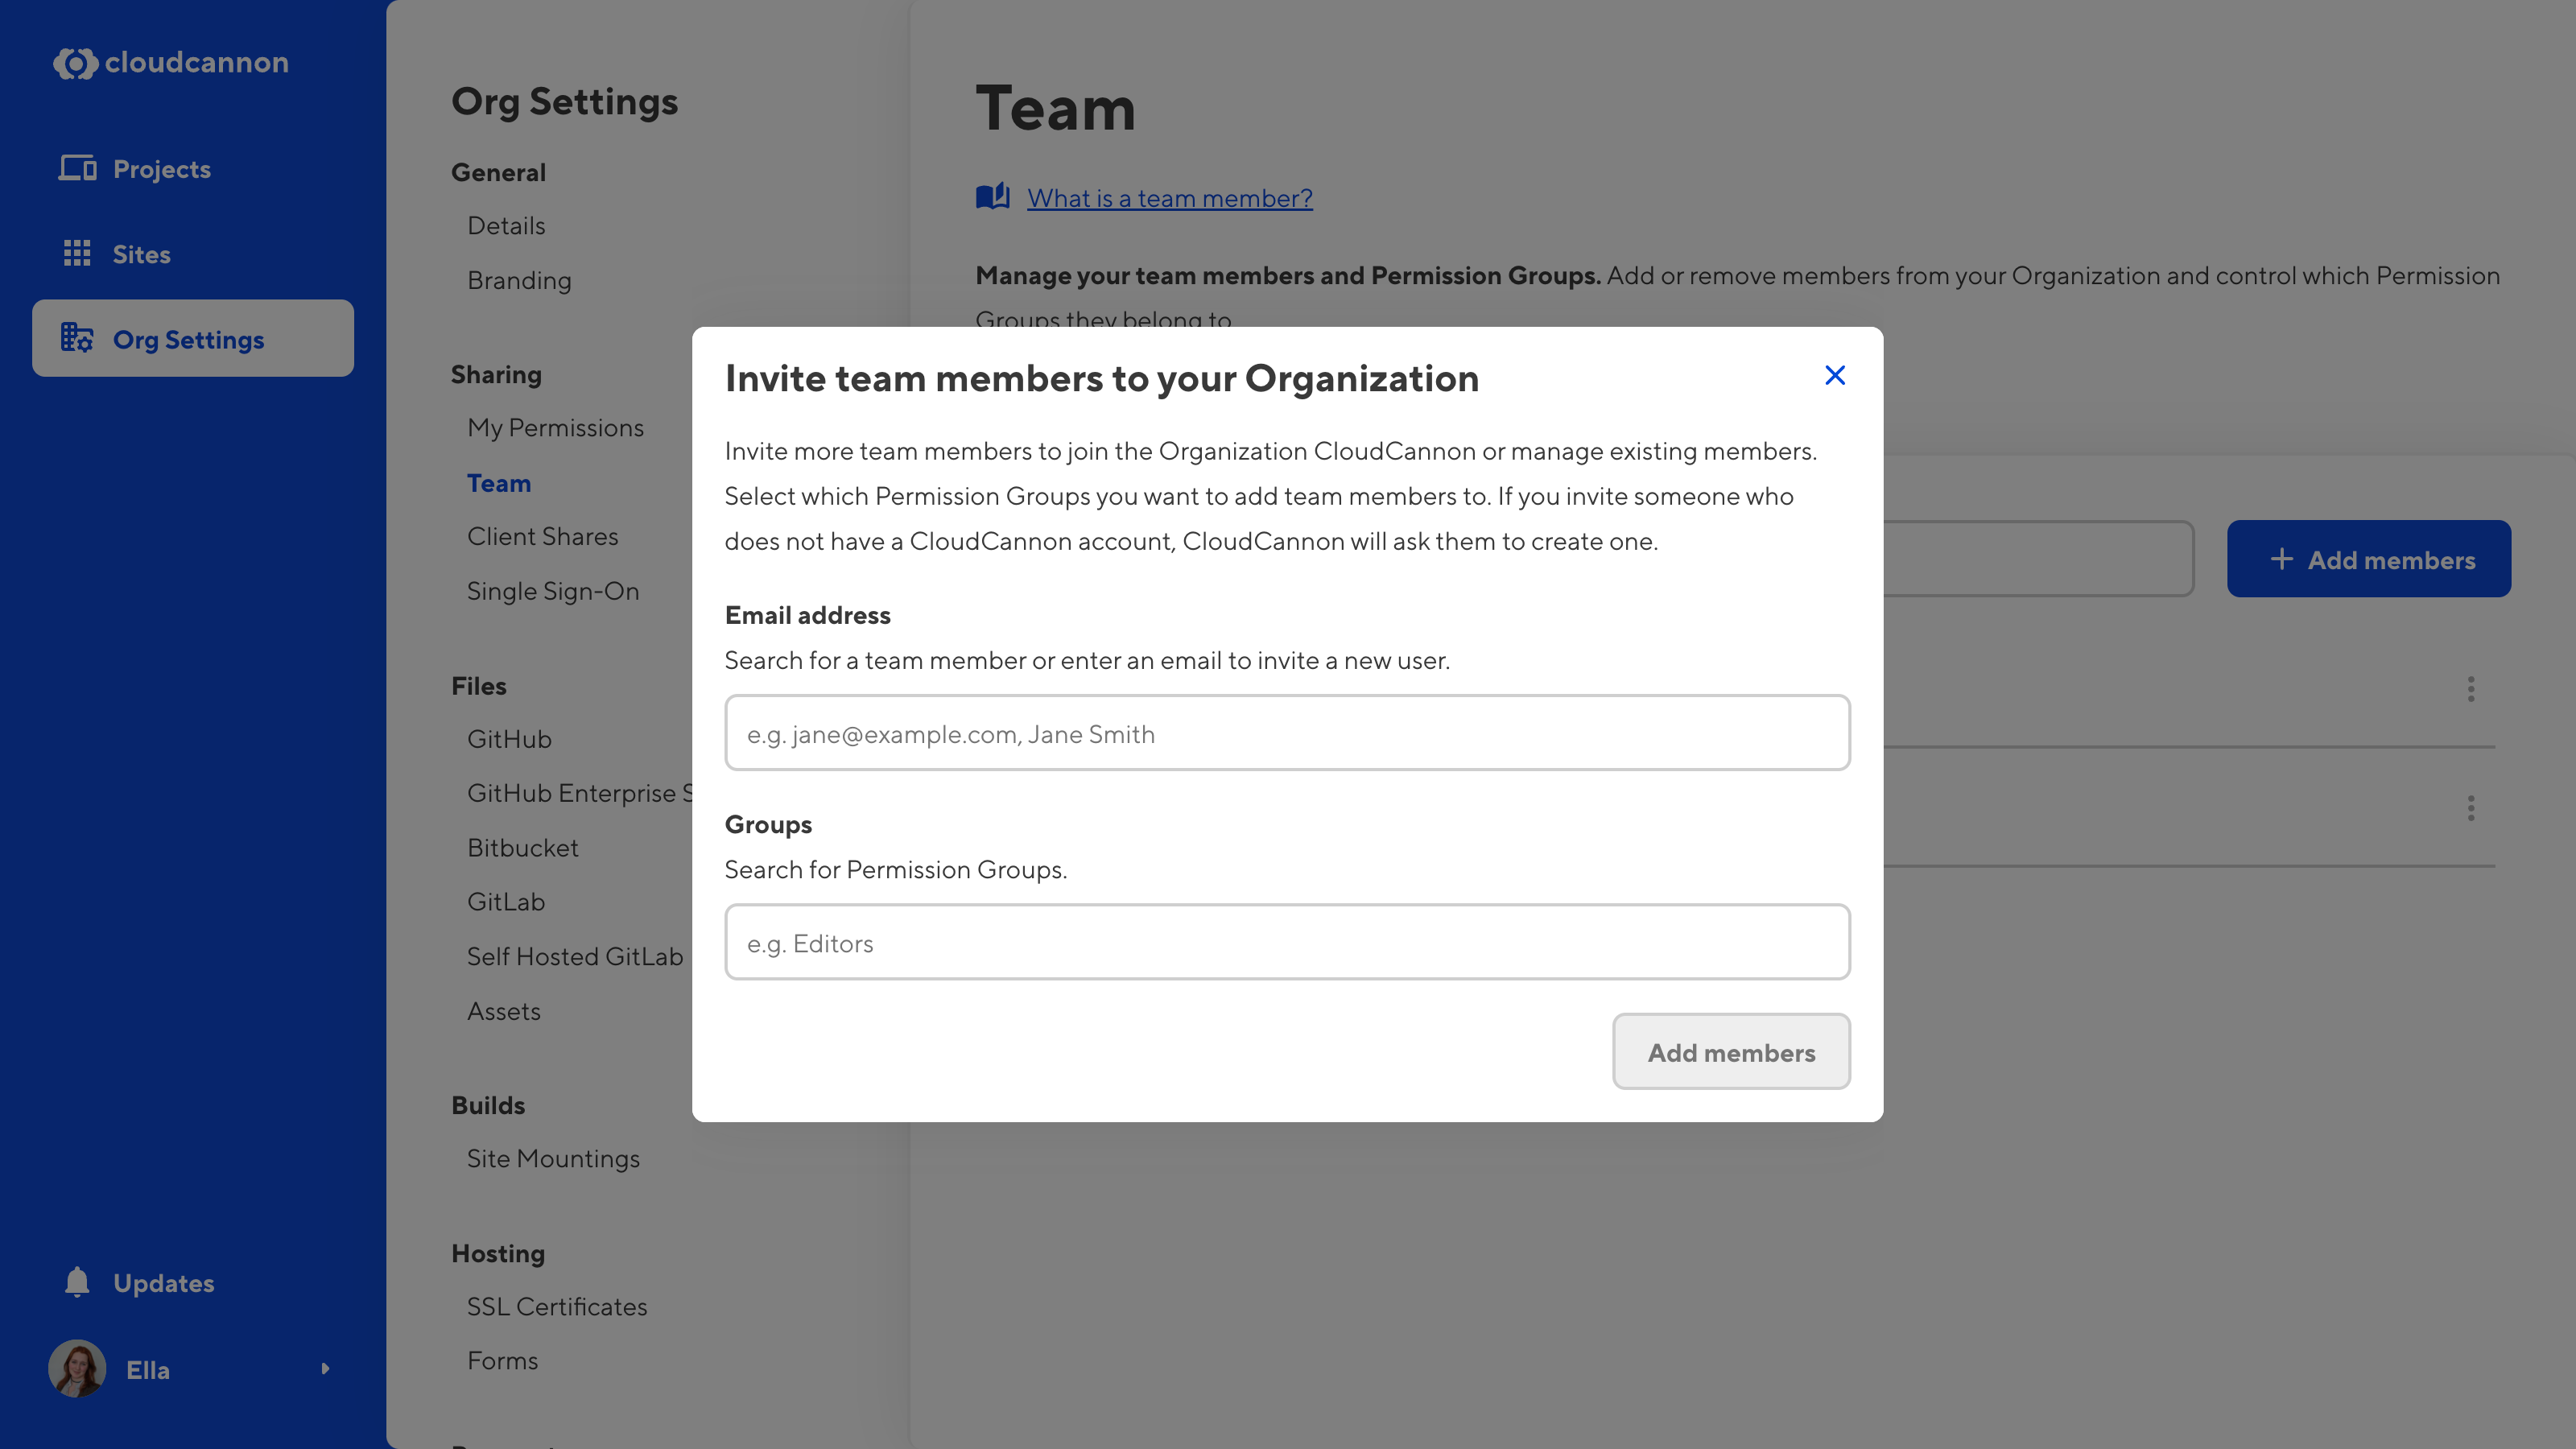 A screenshot of the Team page shows the Invite Team members modal with two fields for names and Permission Groups.